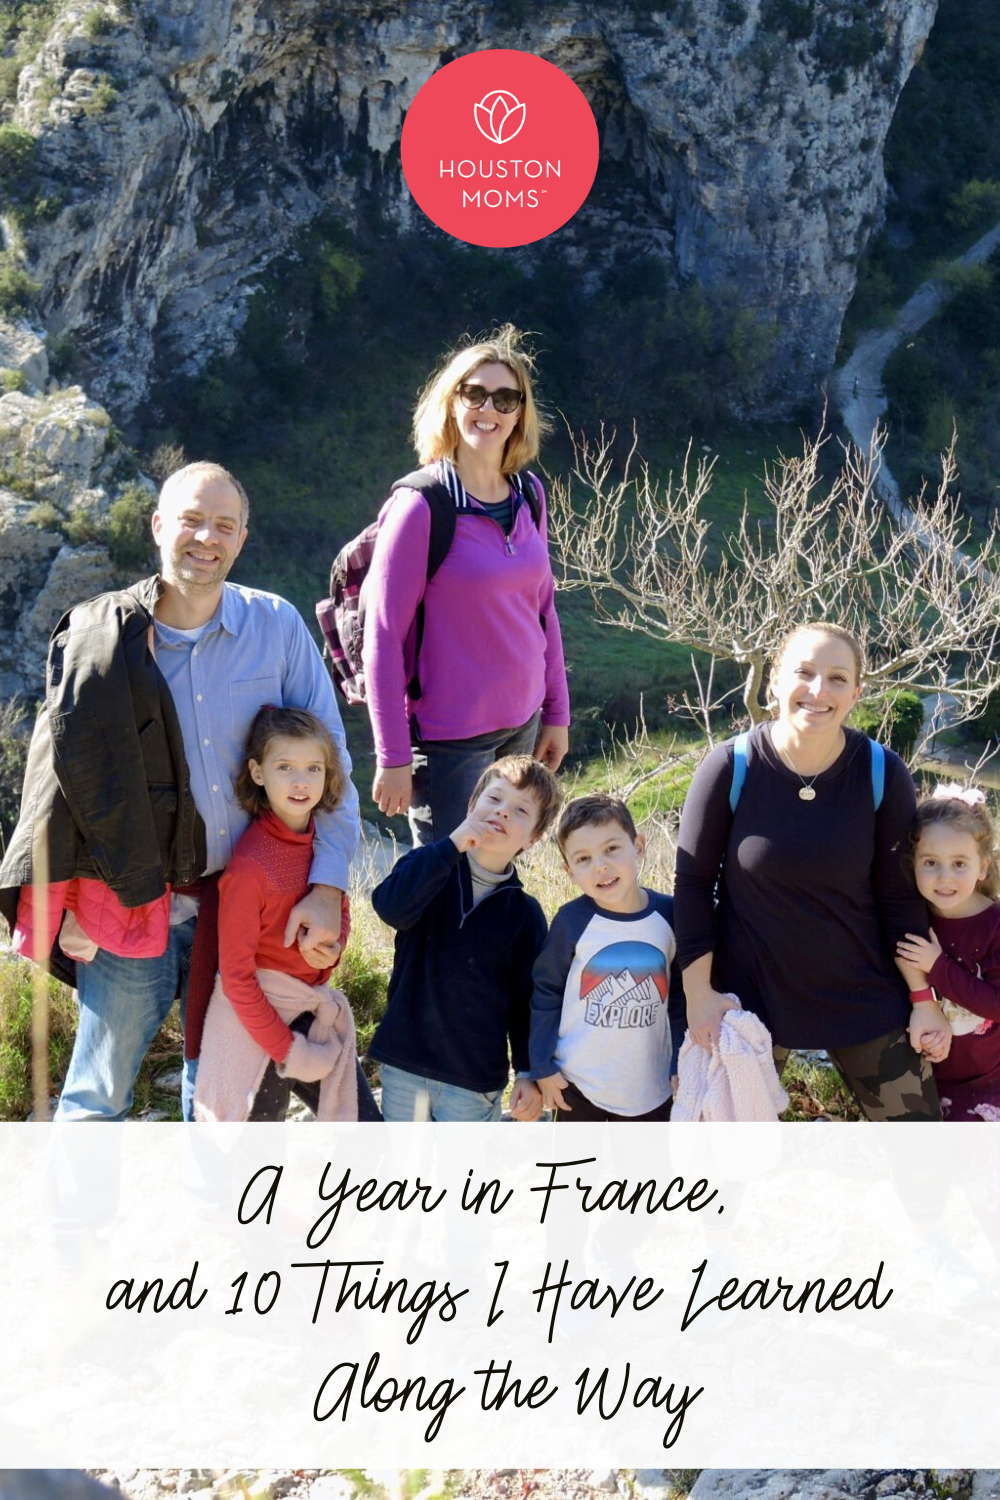 Houston Moms "A Year in France and 10 Things I Have Learned Along the Way" #houstonmoms #houstonmomsblog #momsaroundhouston